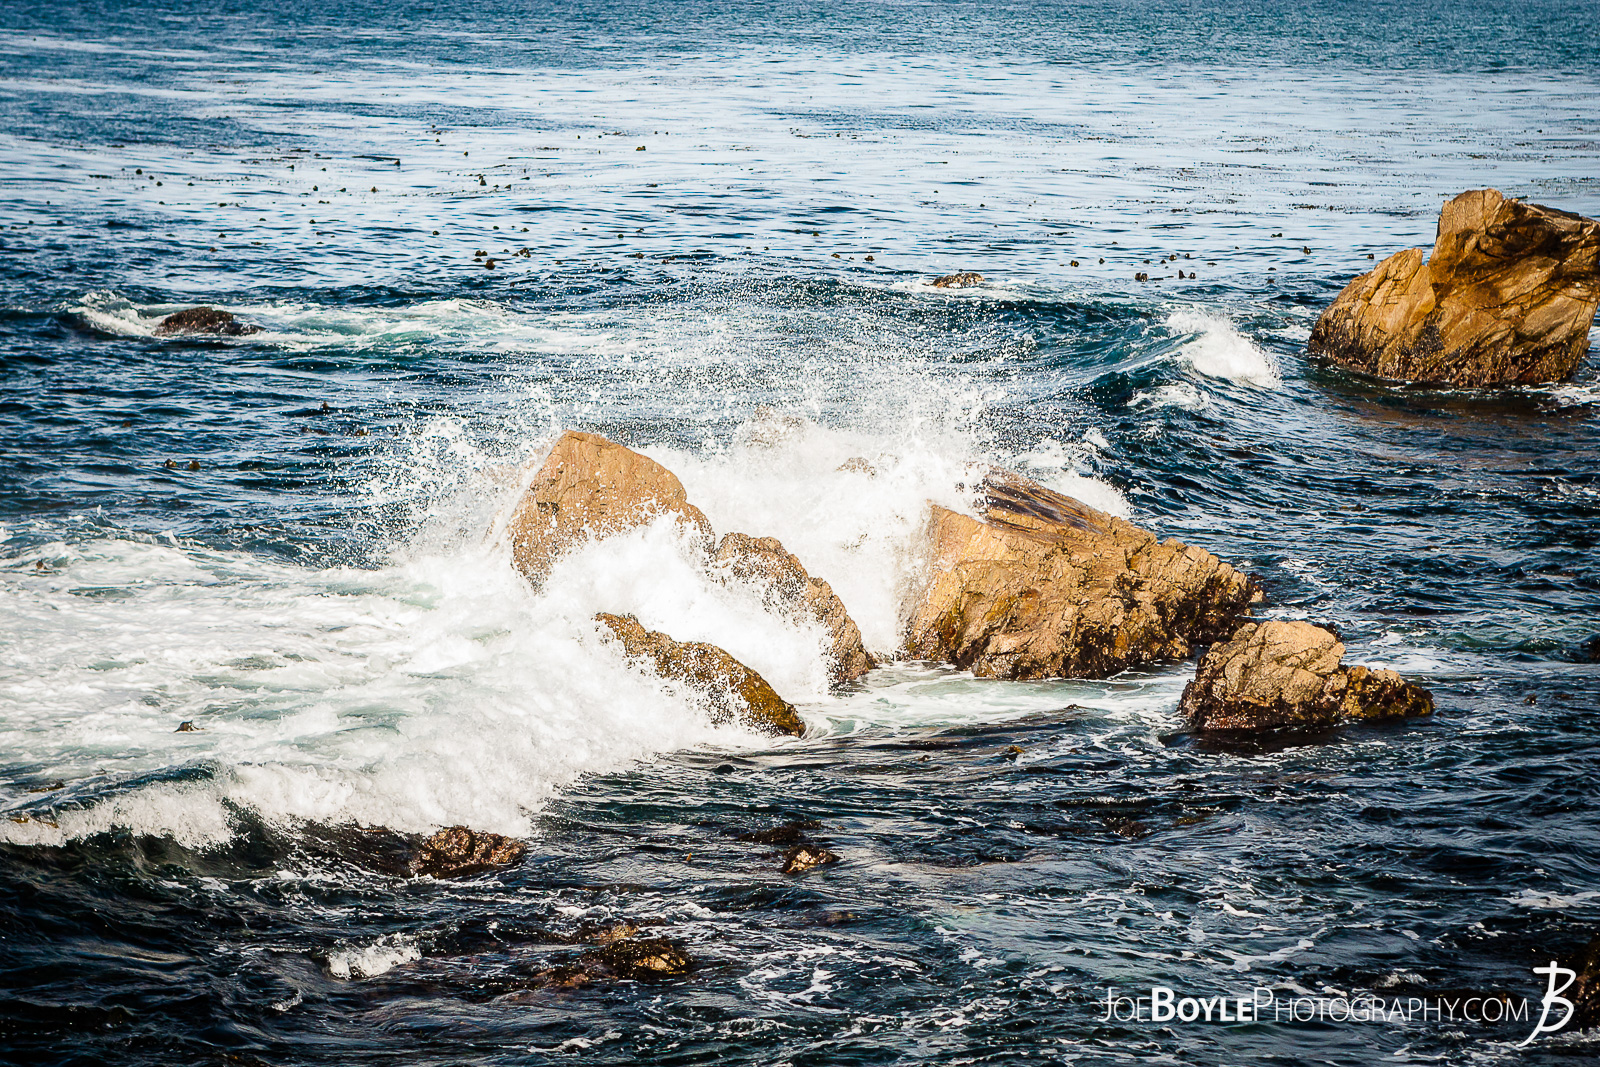  I was traveling down the 17 Mile drive to Carmel by the Sea with some friends and we made a couple pit stops along the way. This is a photo near the coast where the wind was picking up creating waves that were splashing on the rocks! 